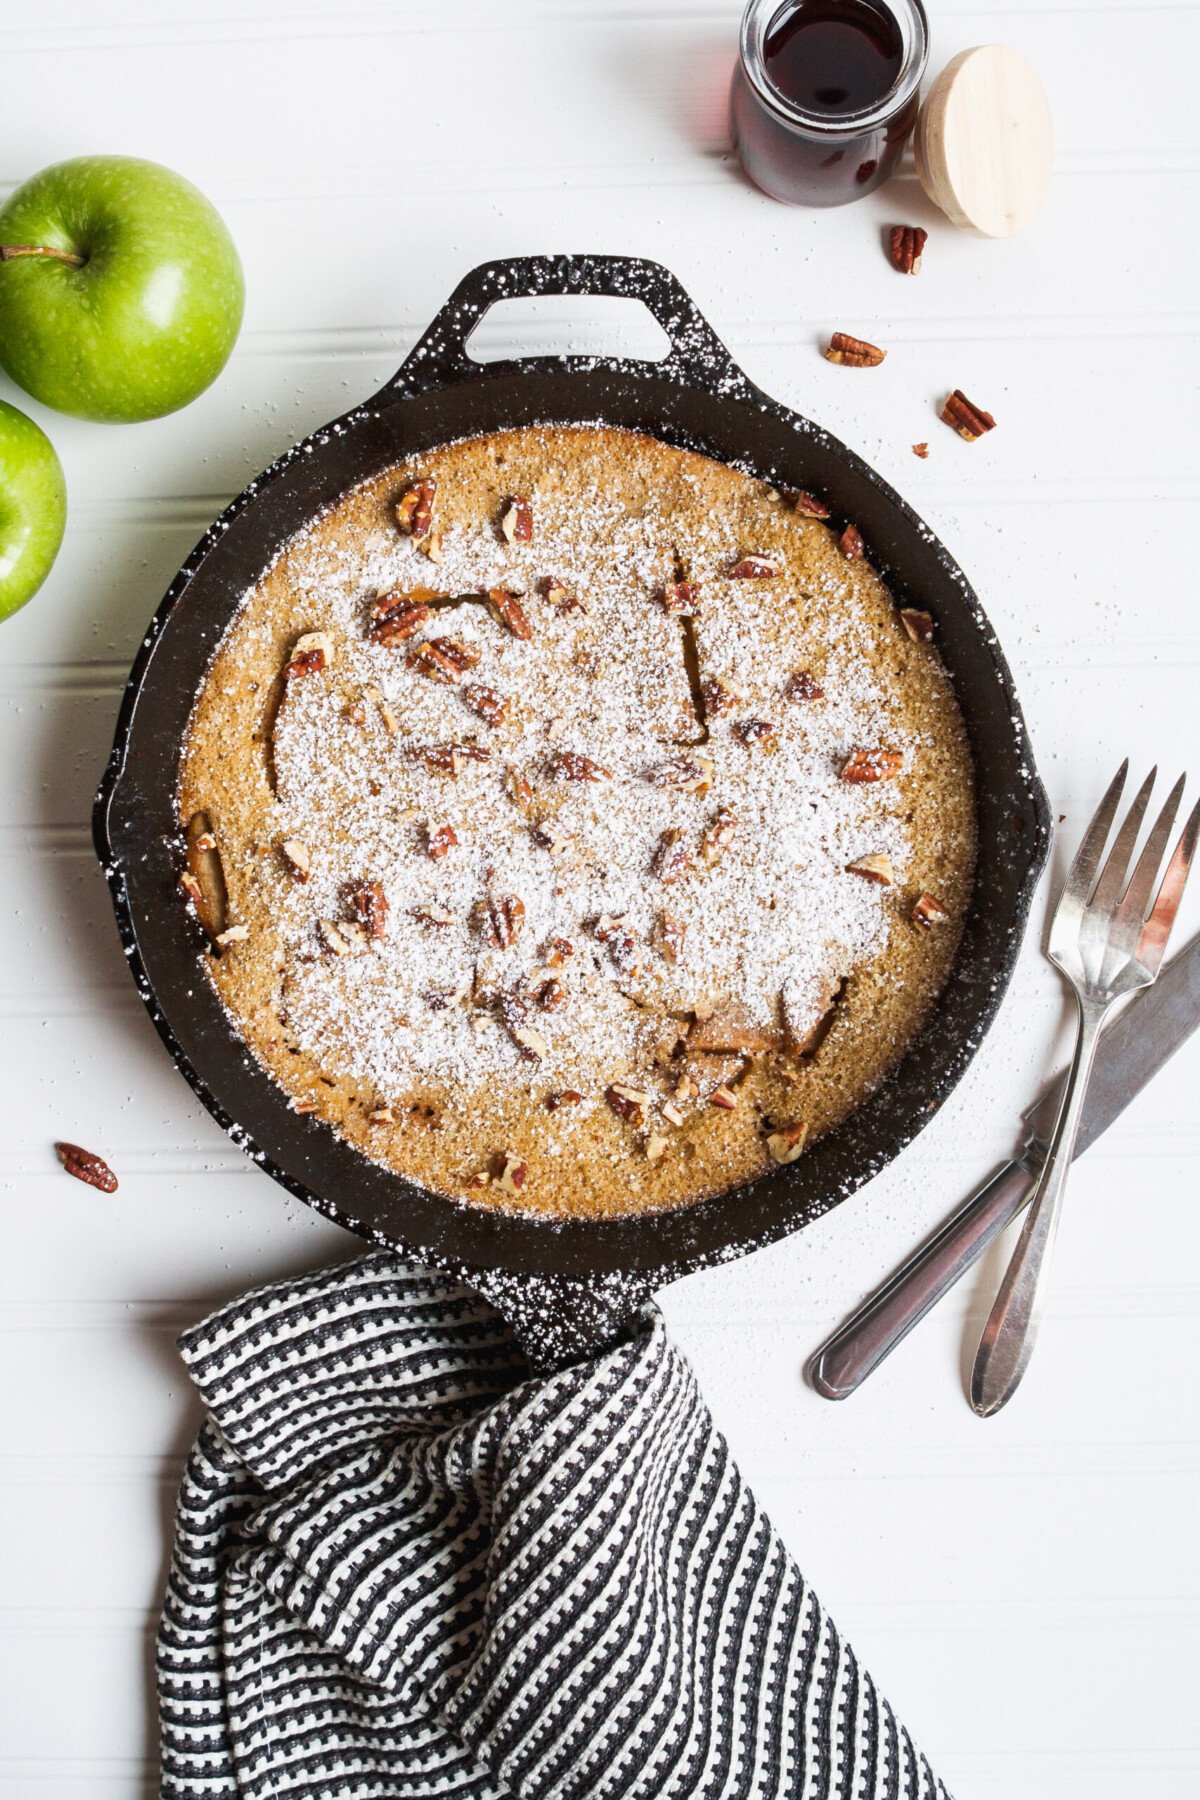 Photograph of a puffed apple pancake in a cast iron skillet on a white table